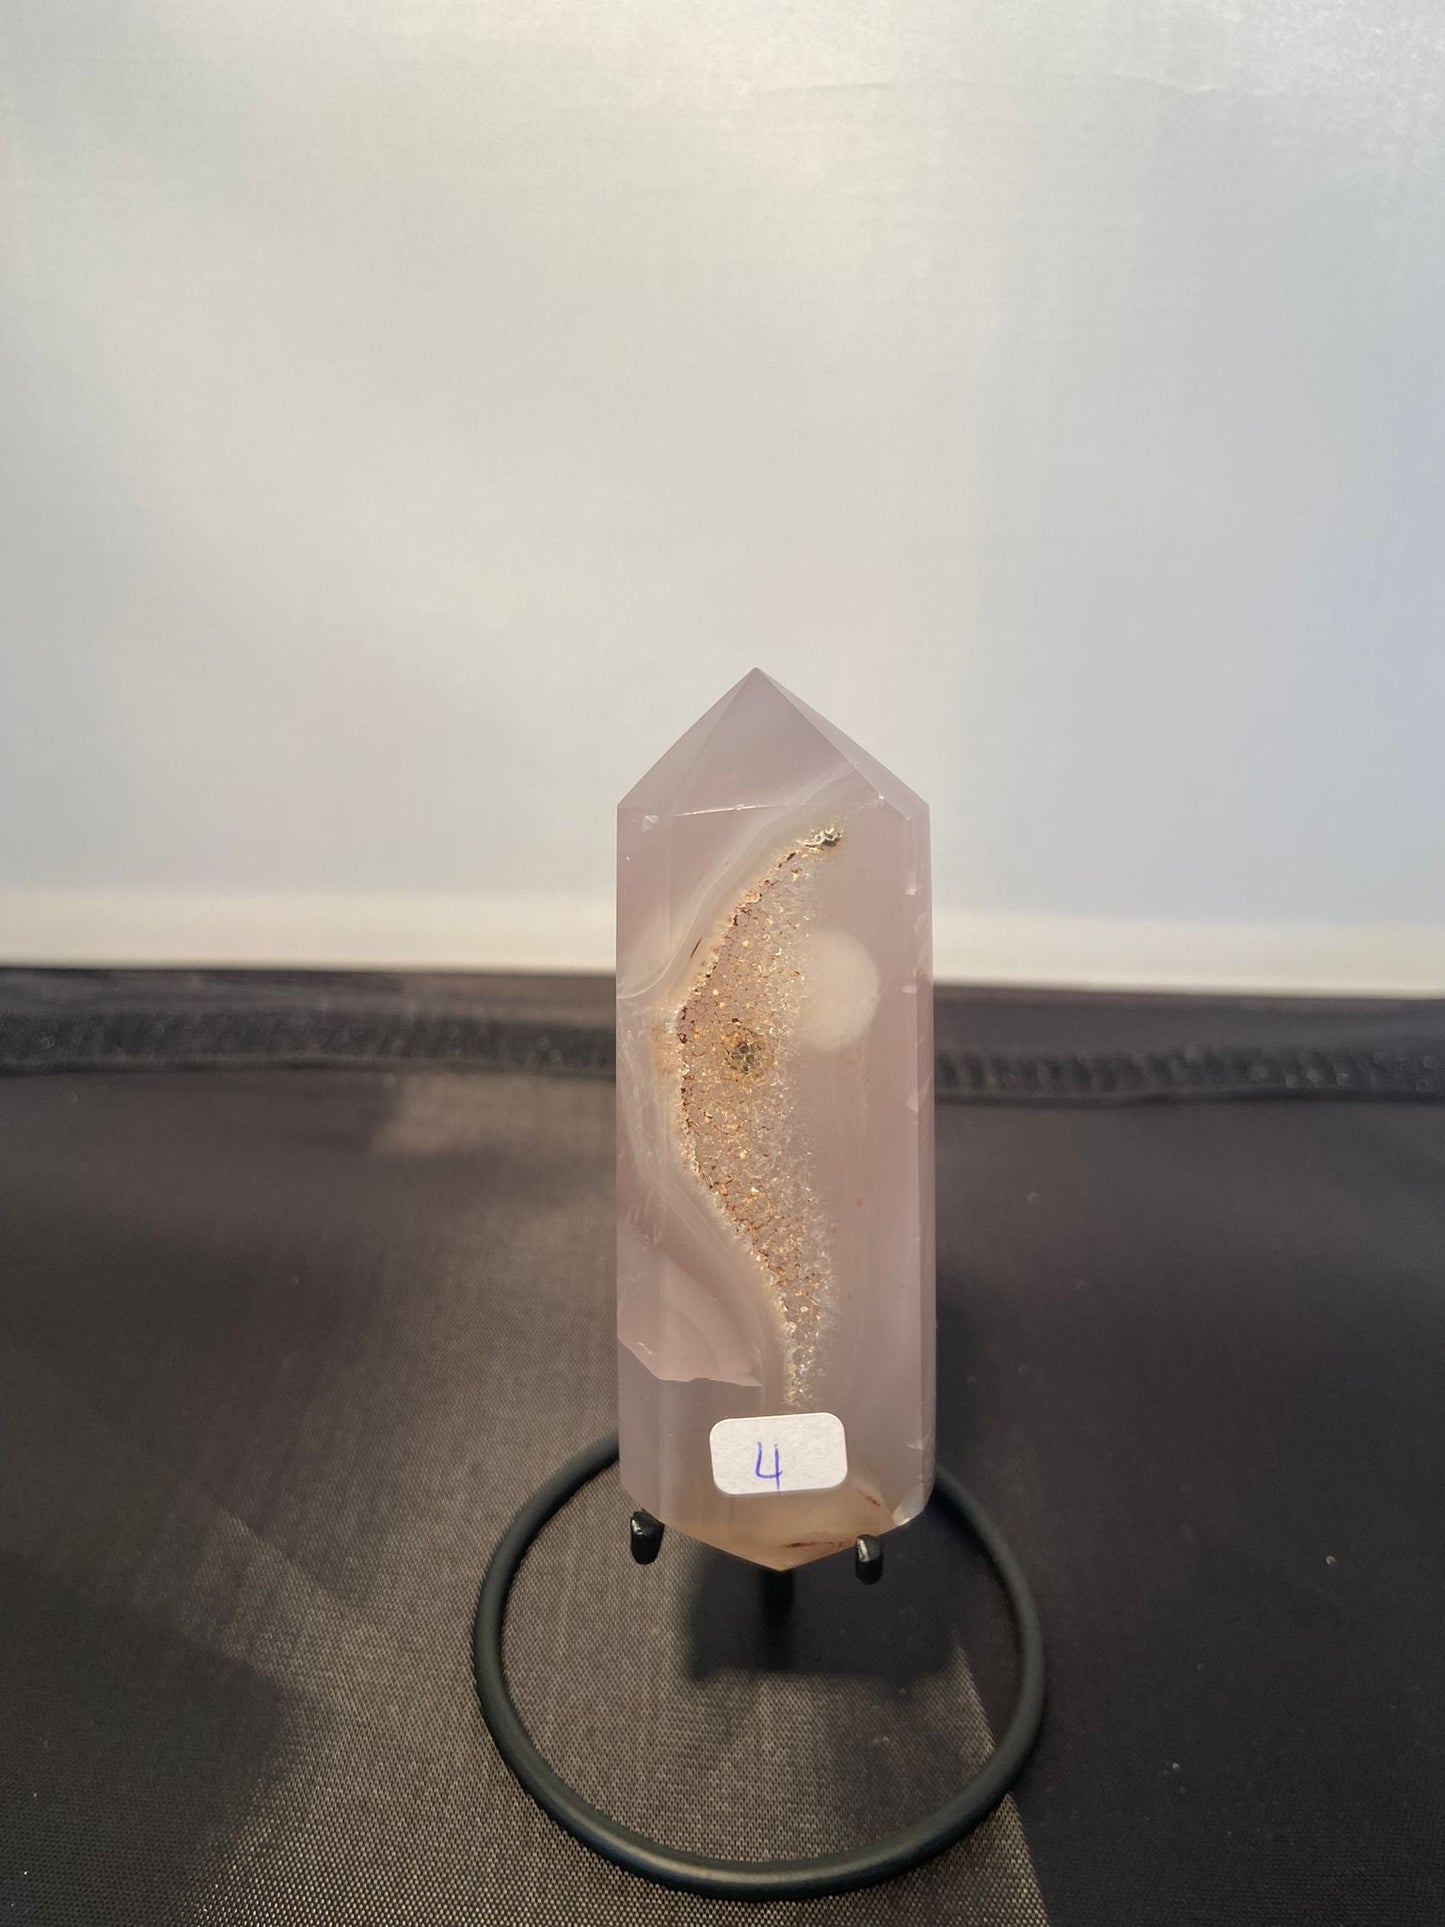 Druzy Agate Double Terminated Points on stand